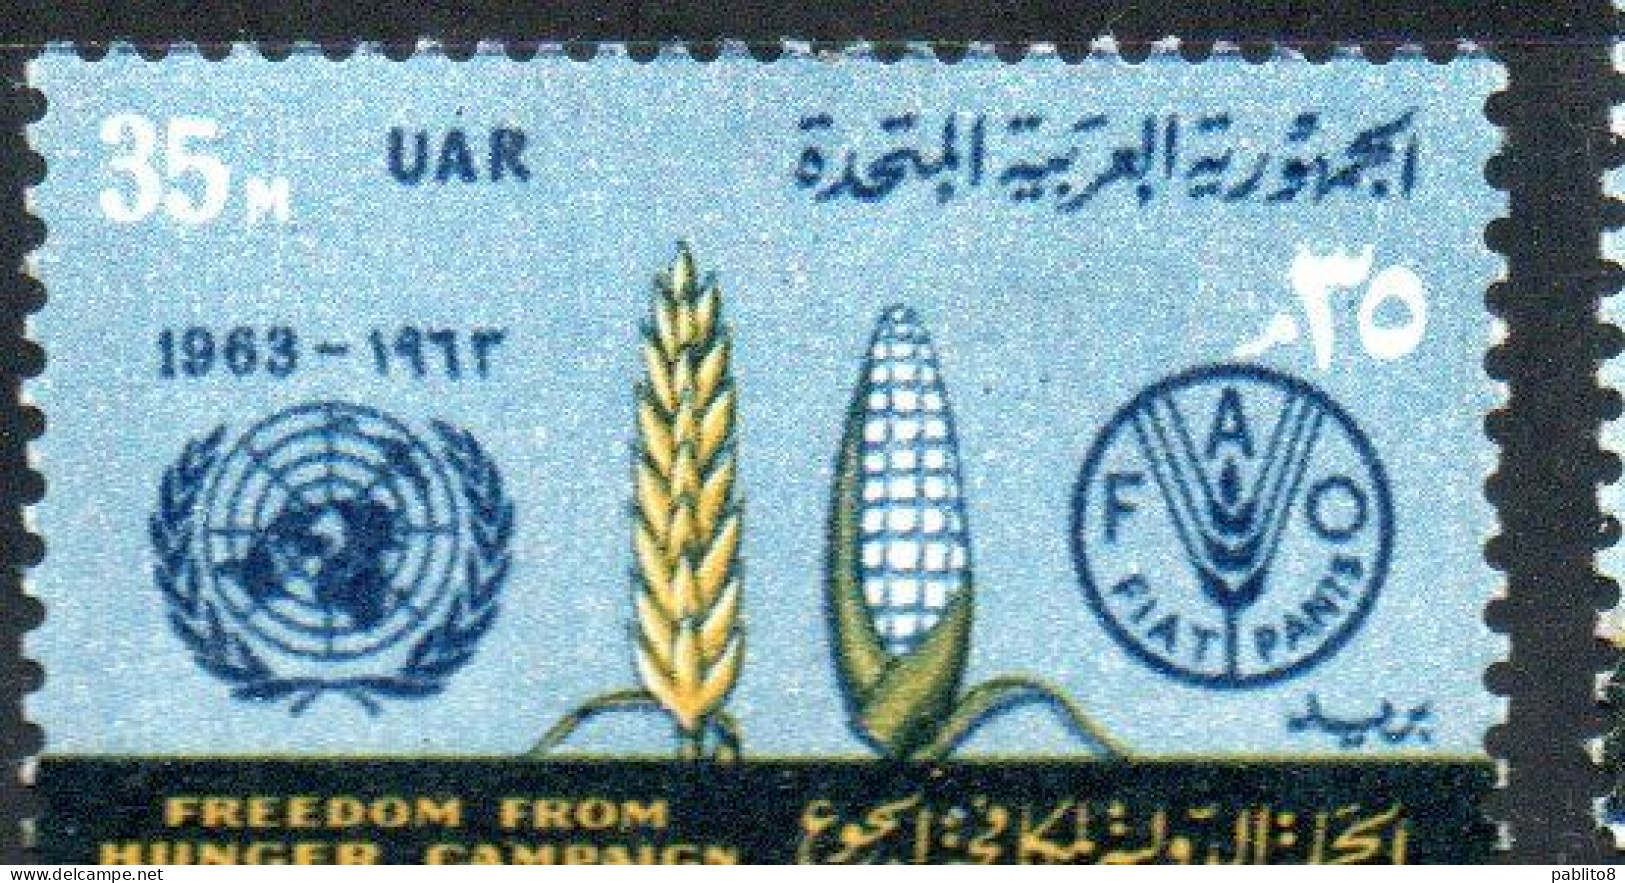 UAR EGYPT EGITTO 1963 FAO FREEDOM FROM HUNGER CAMPAIGN WHEAT CORN AND EMBLEMS 35m MH - Unused Stamps